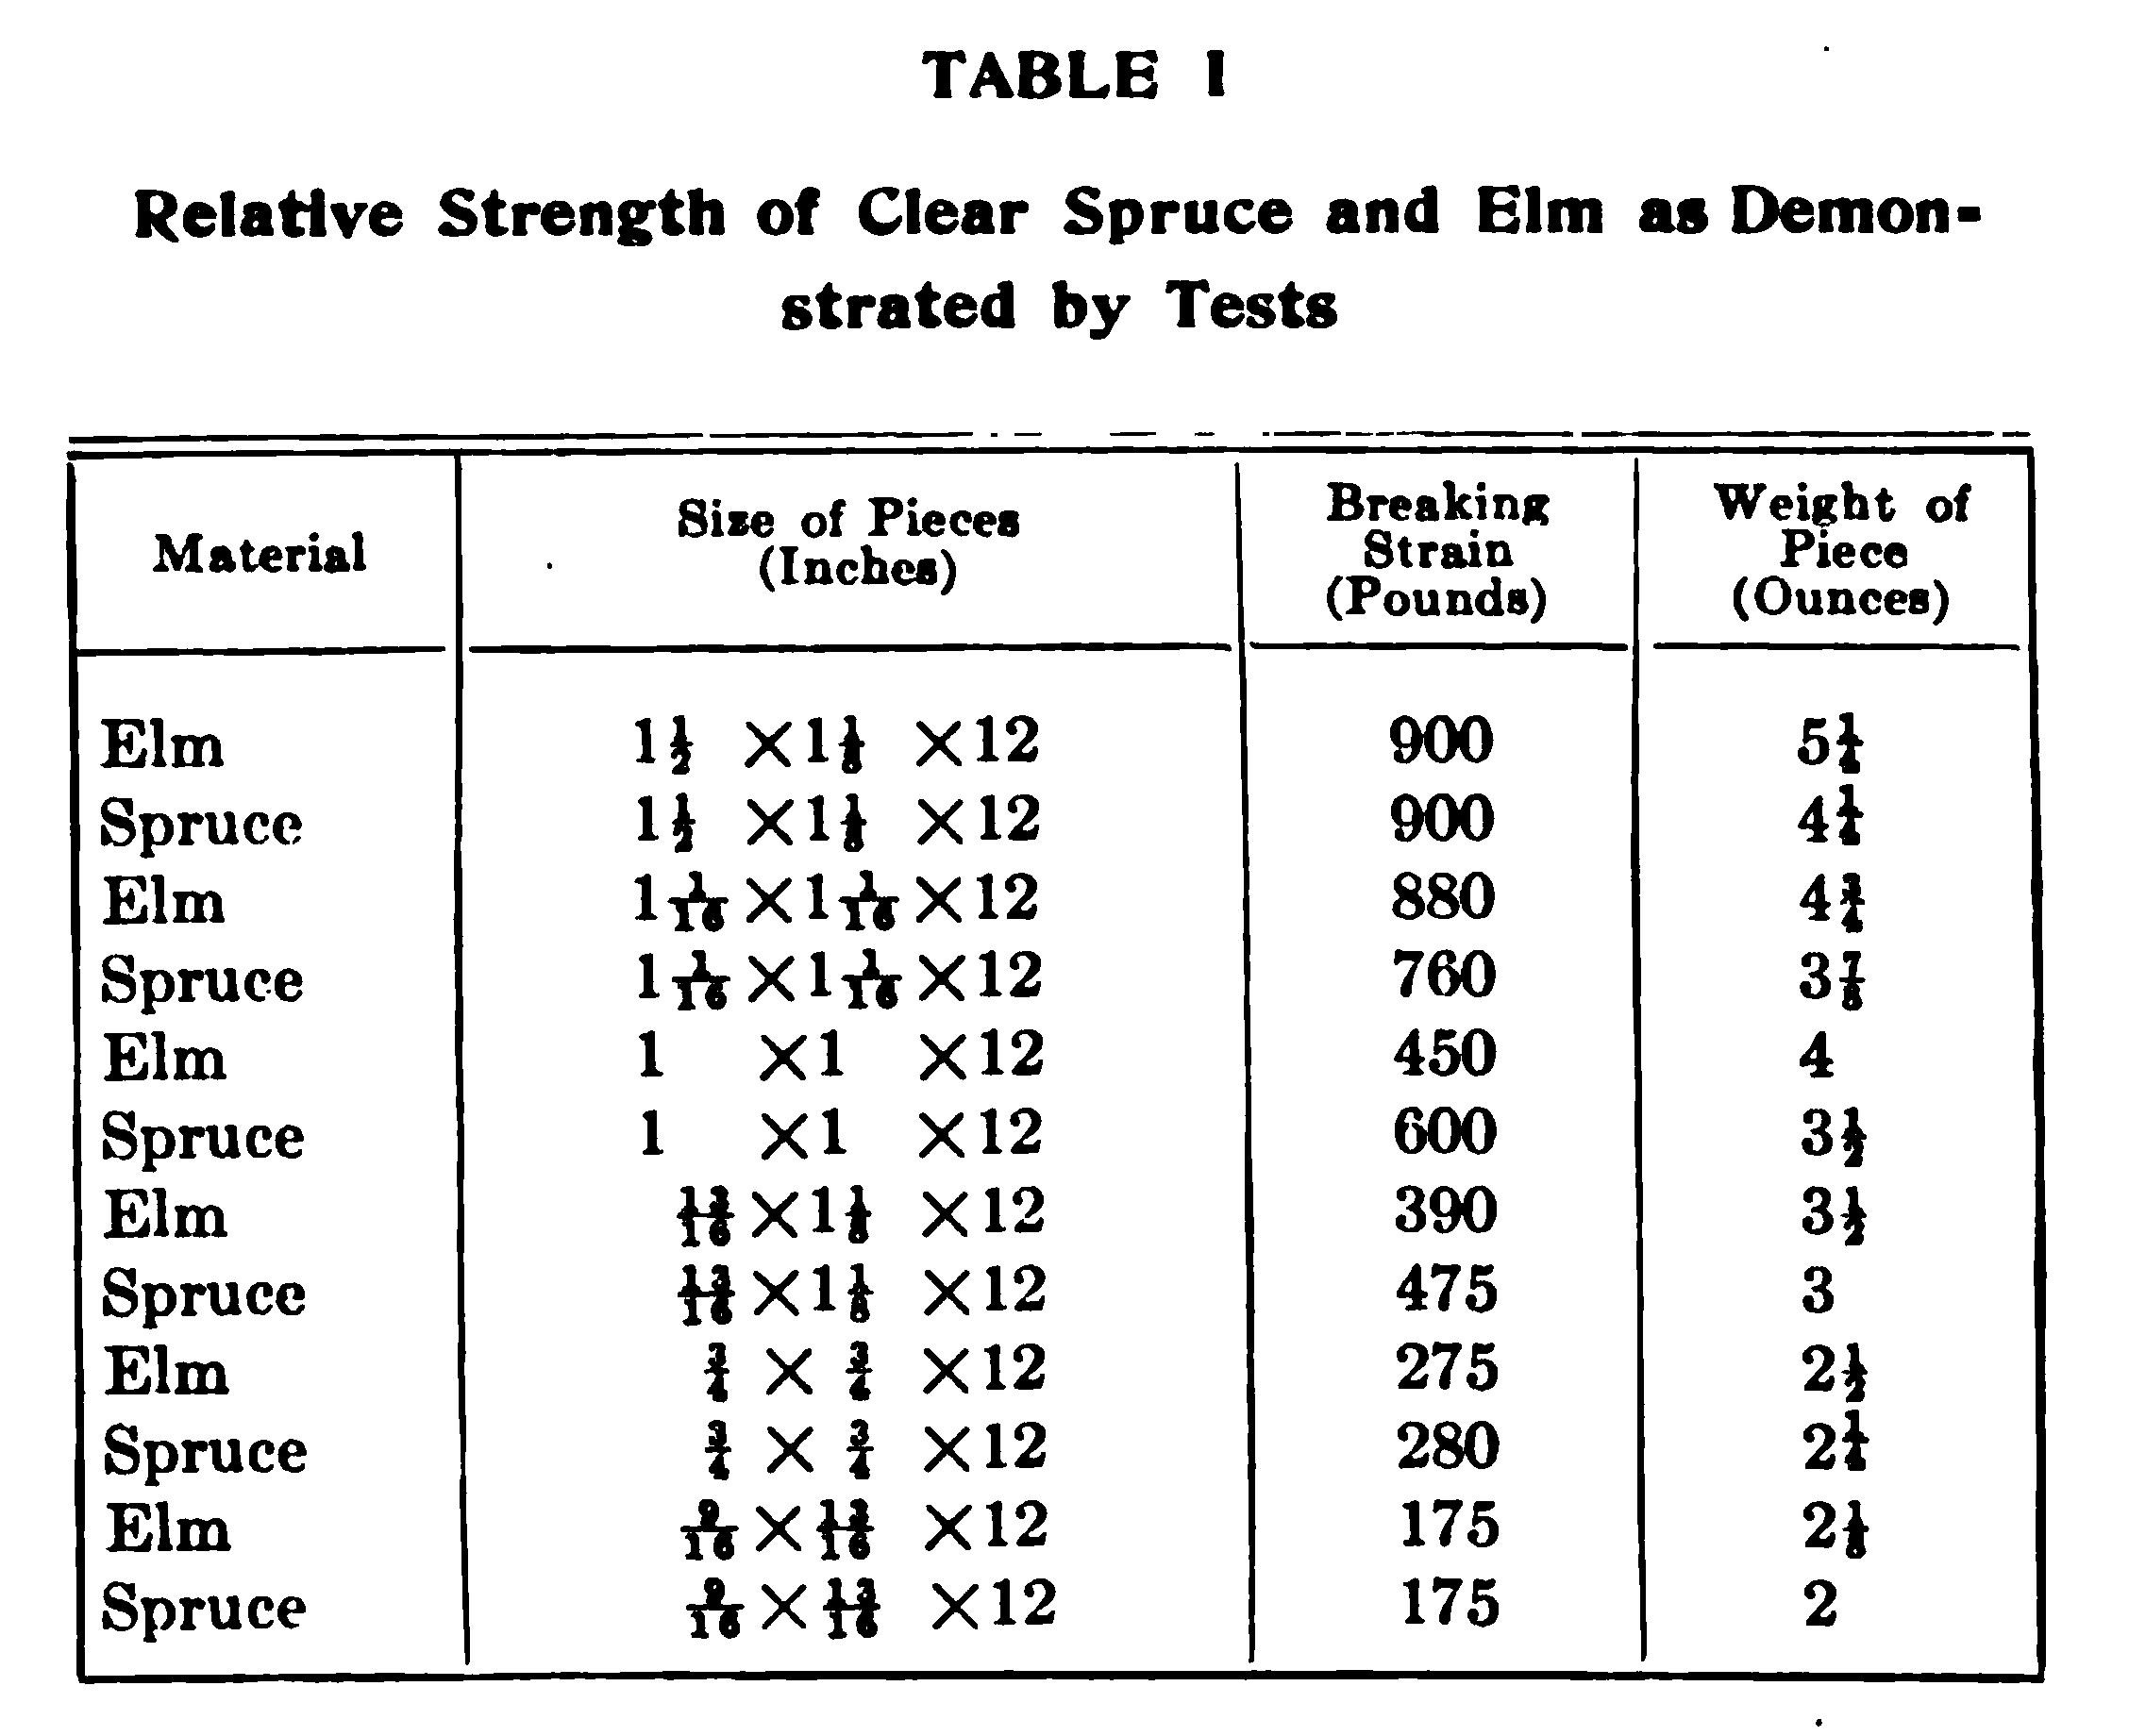 Table 1. Relative Strength of Clear Spruce and Elm as Demonstrated By Tests